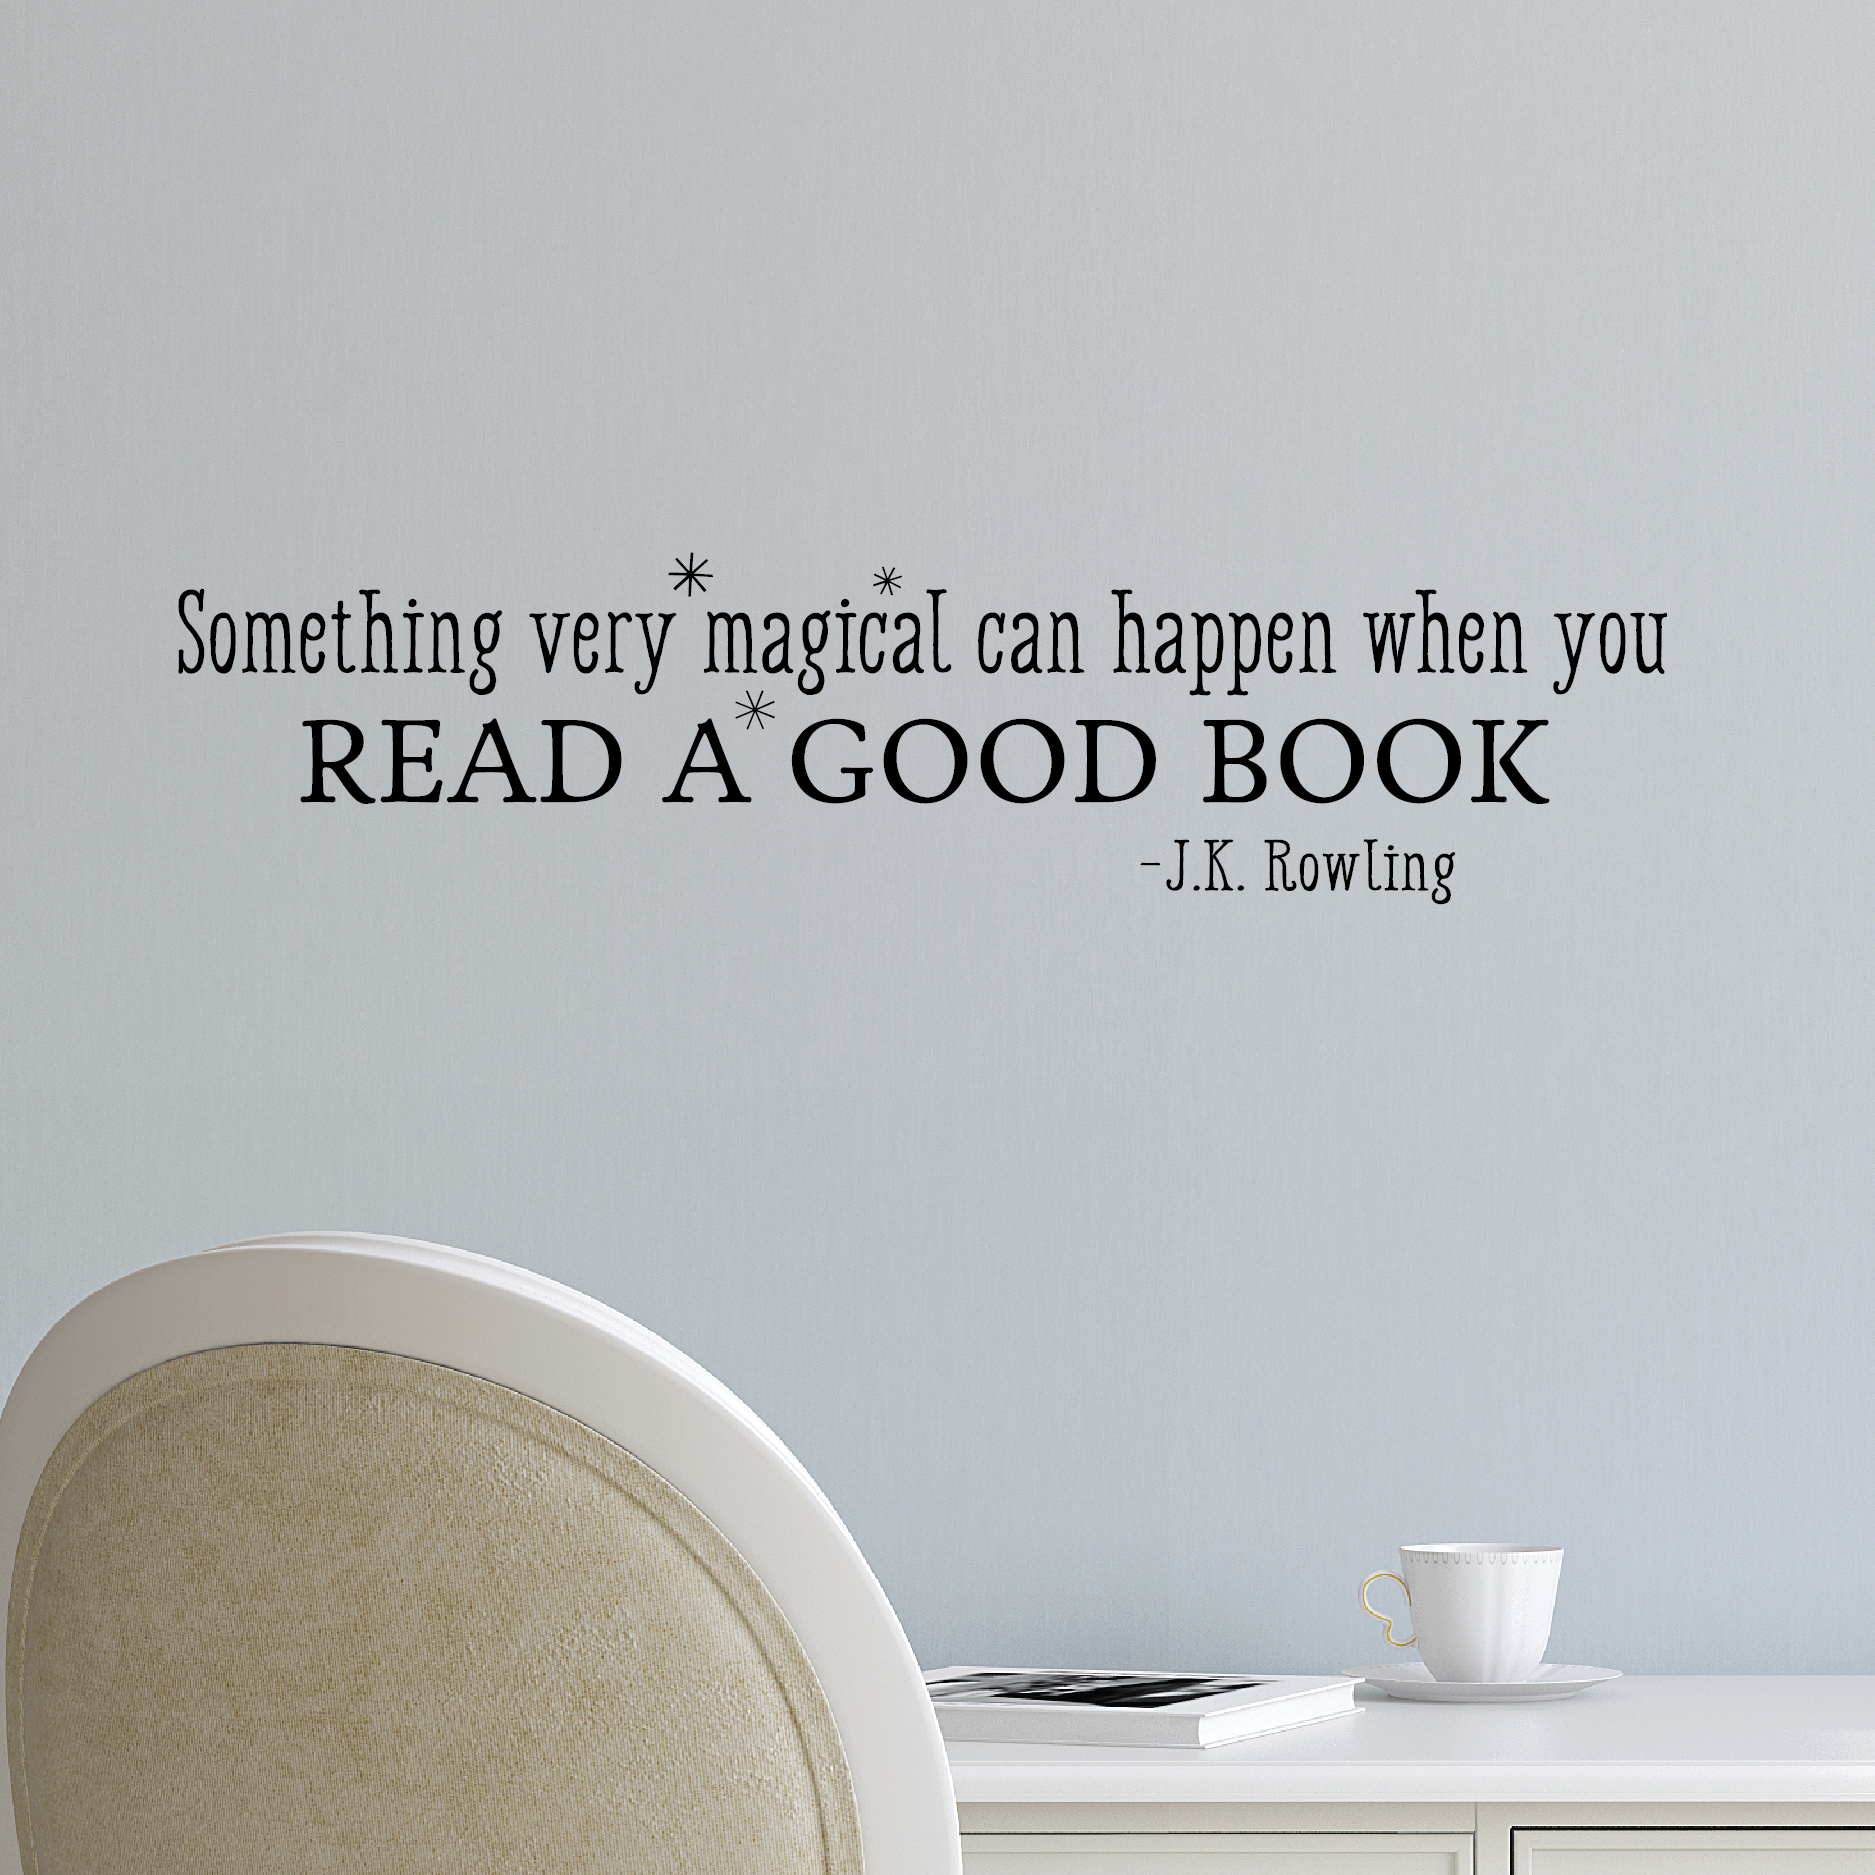 good thoughts on reading books